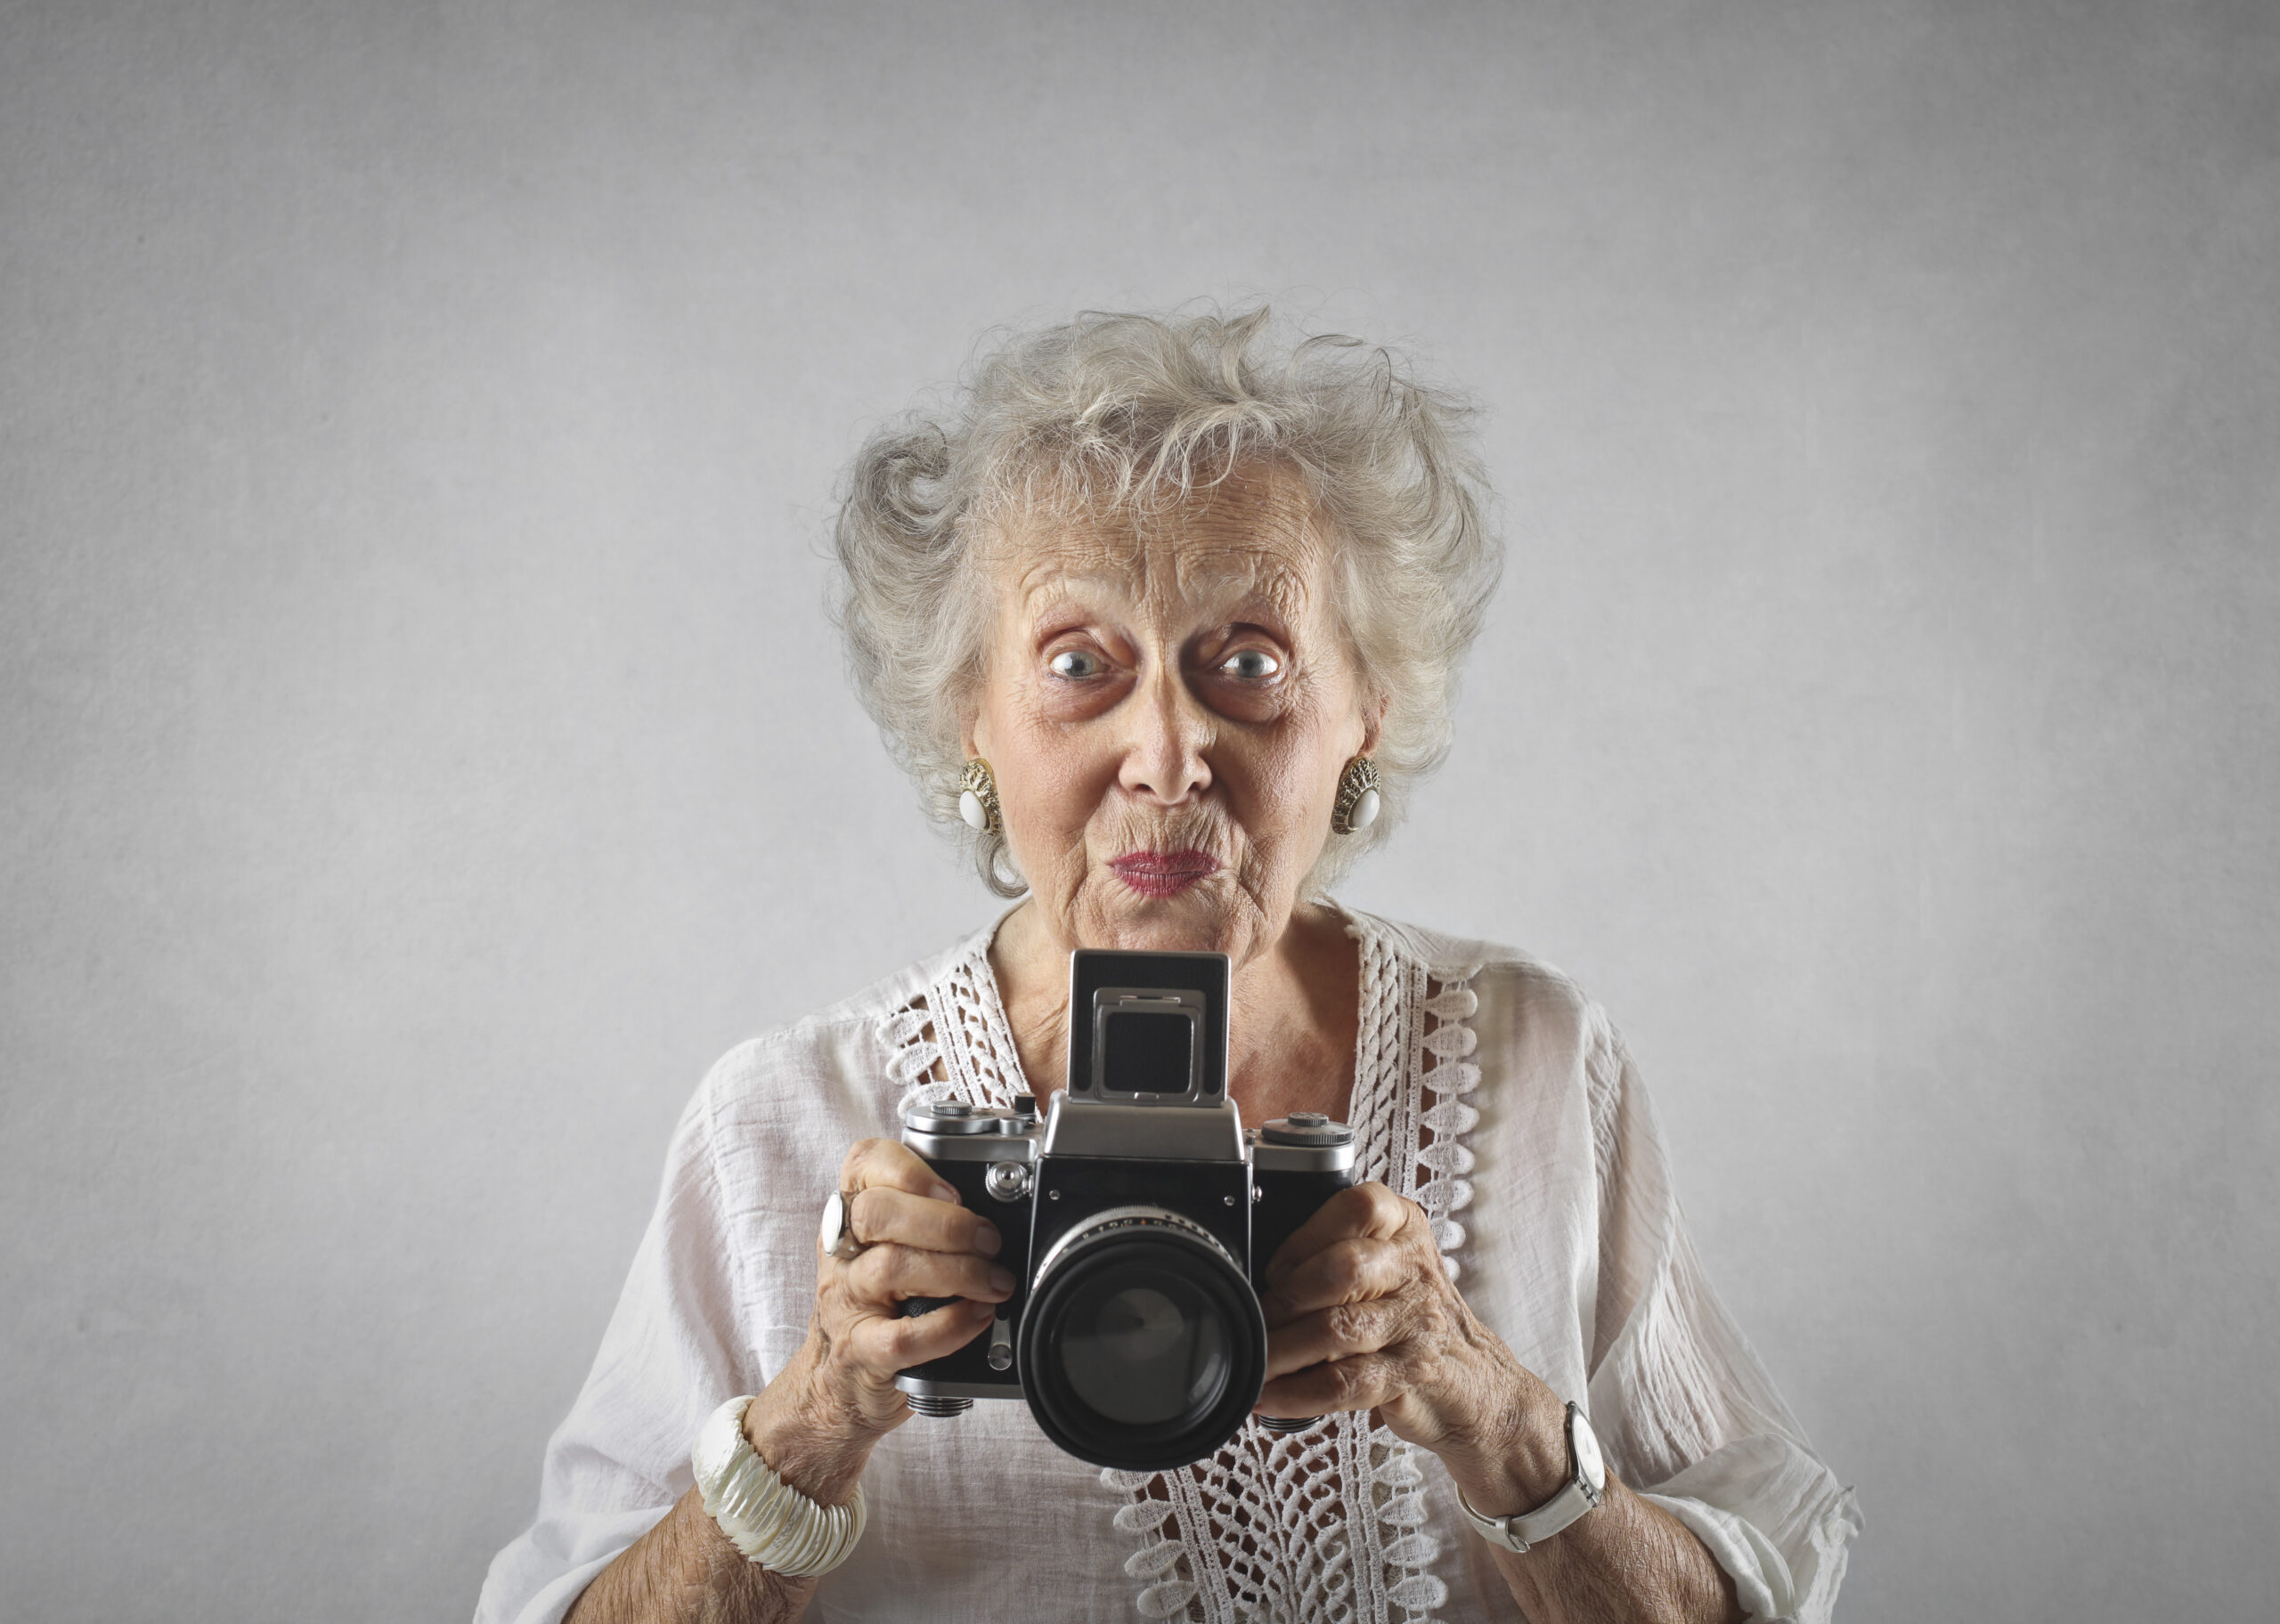 Activies and Learning With Dementia – Polaroid Camera Idea